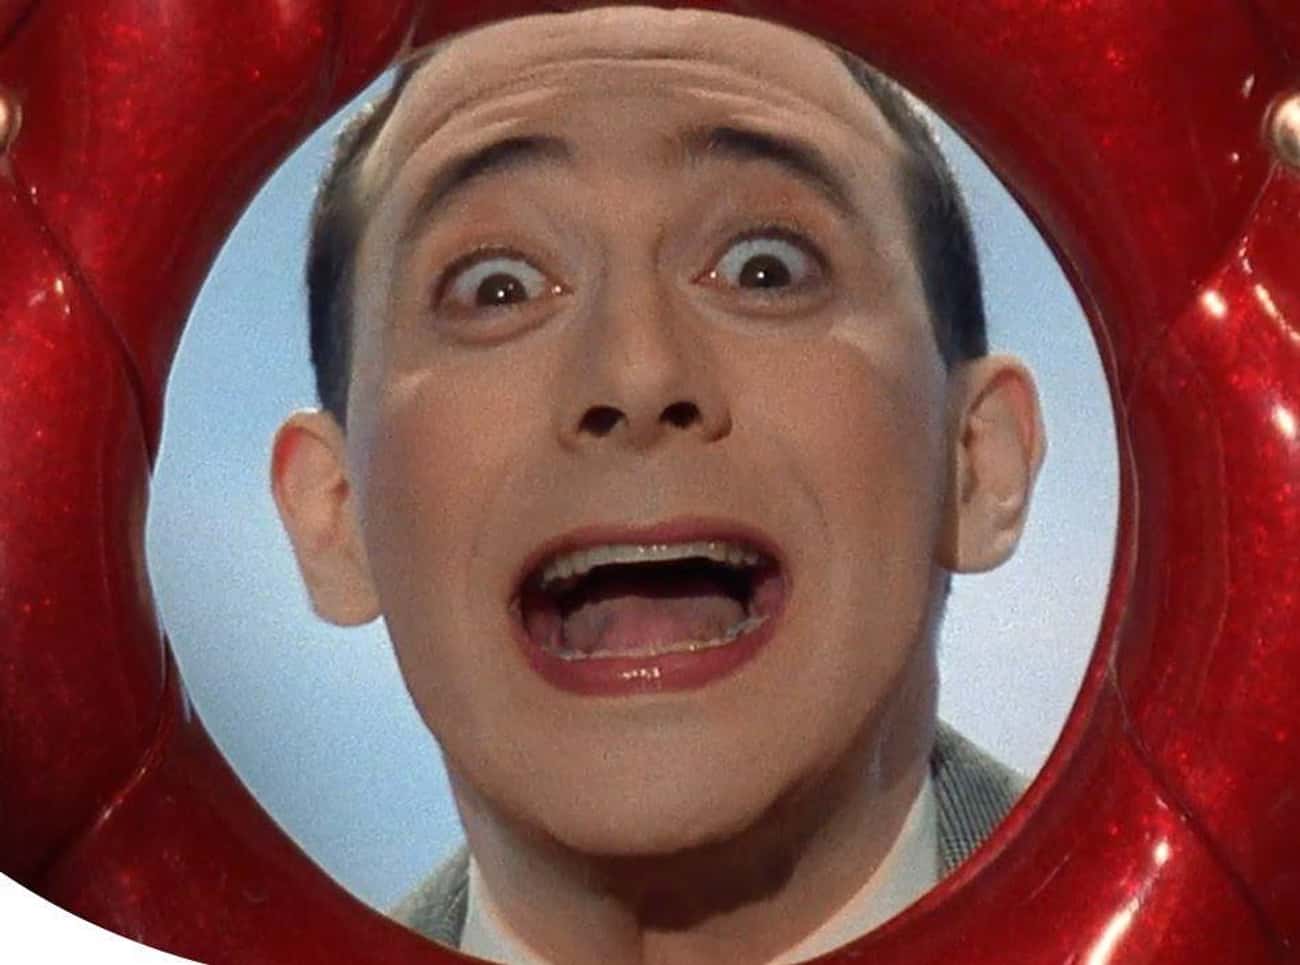 His First Job Was As A Gofer For 'Pee-Wee's Playhouse'